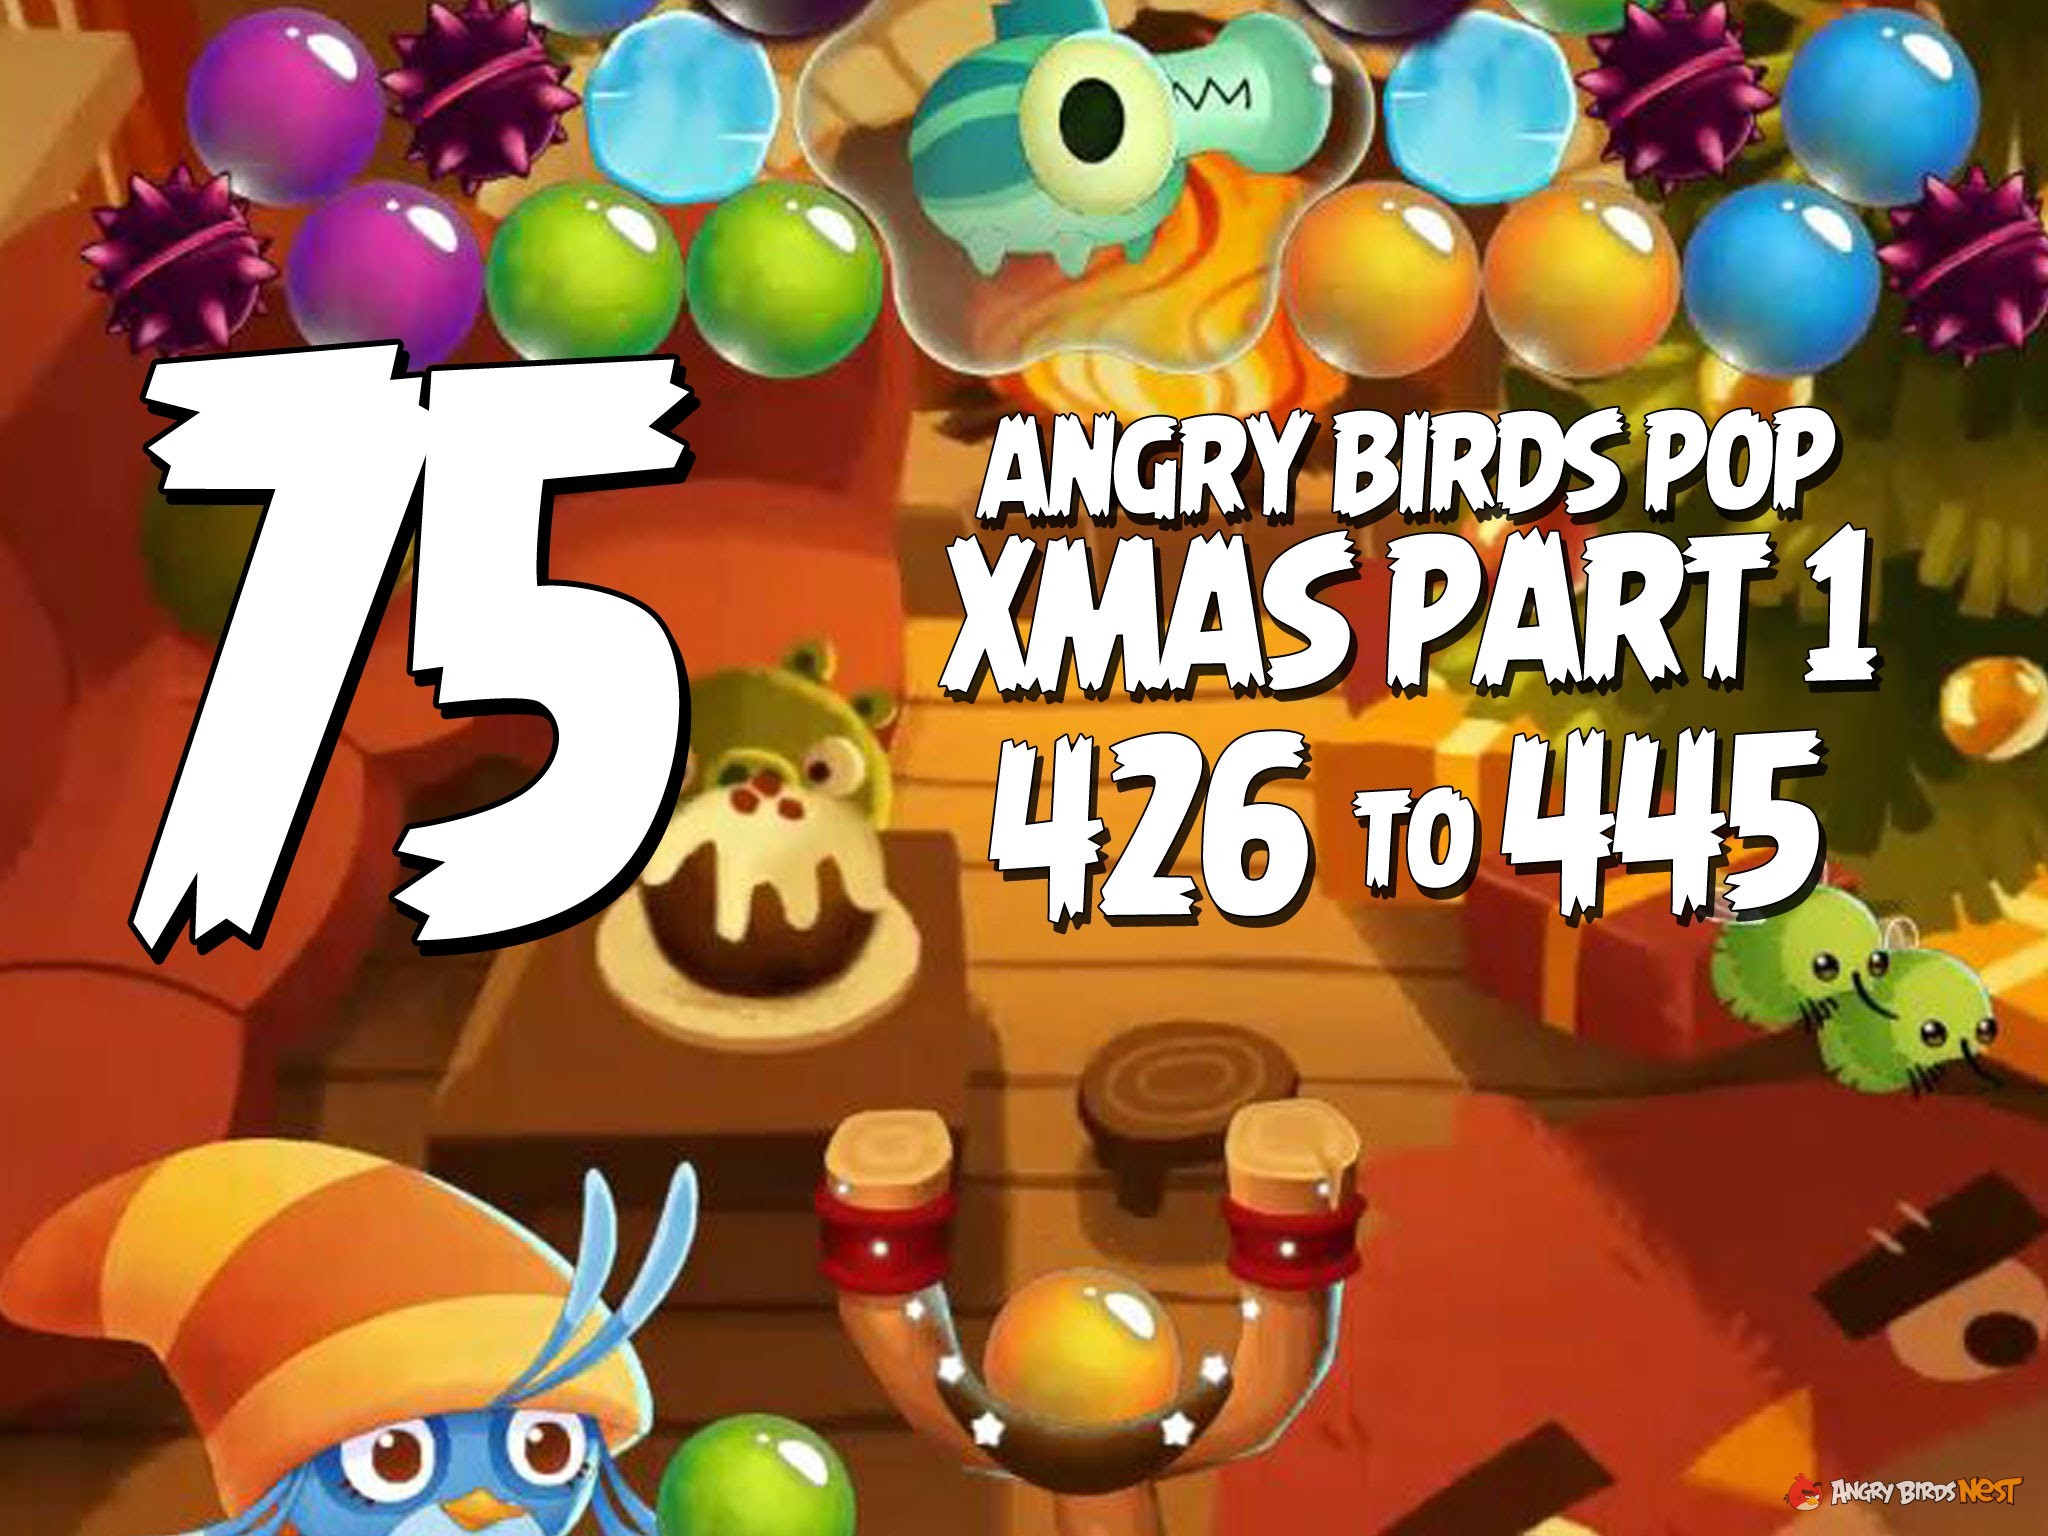 Let's Play Angry Birds Pop Part 75 Levels 426 to 445 - Christmas Part 2